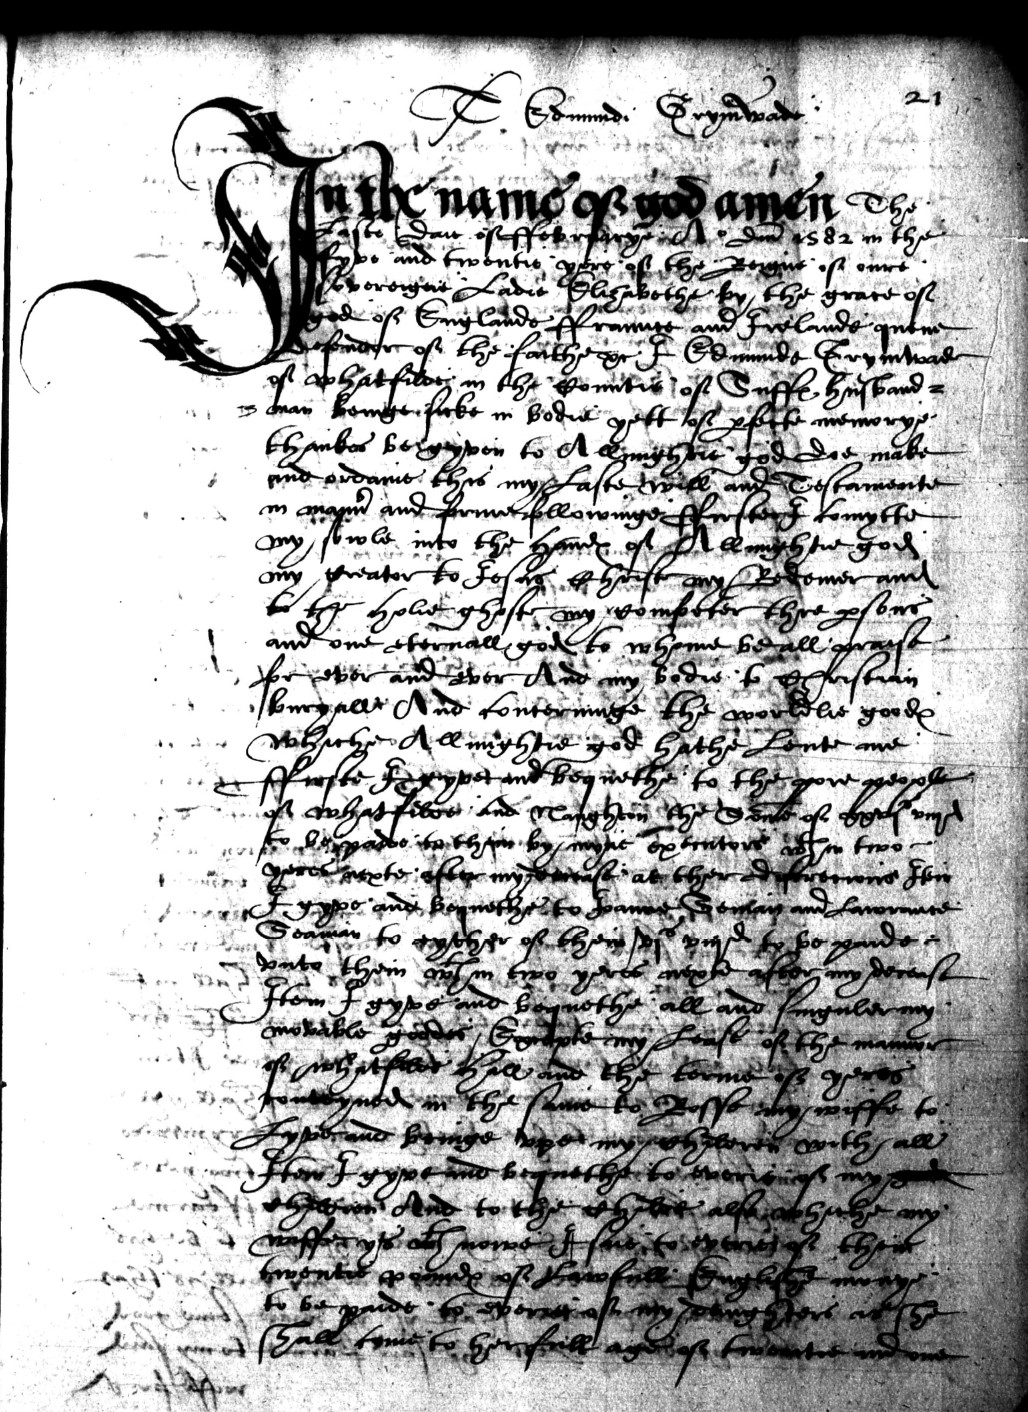 Will of Edmunde Grymwade, page 1